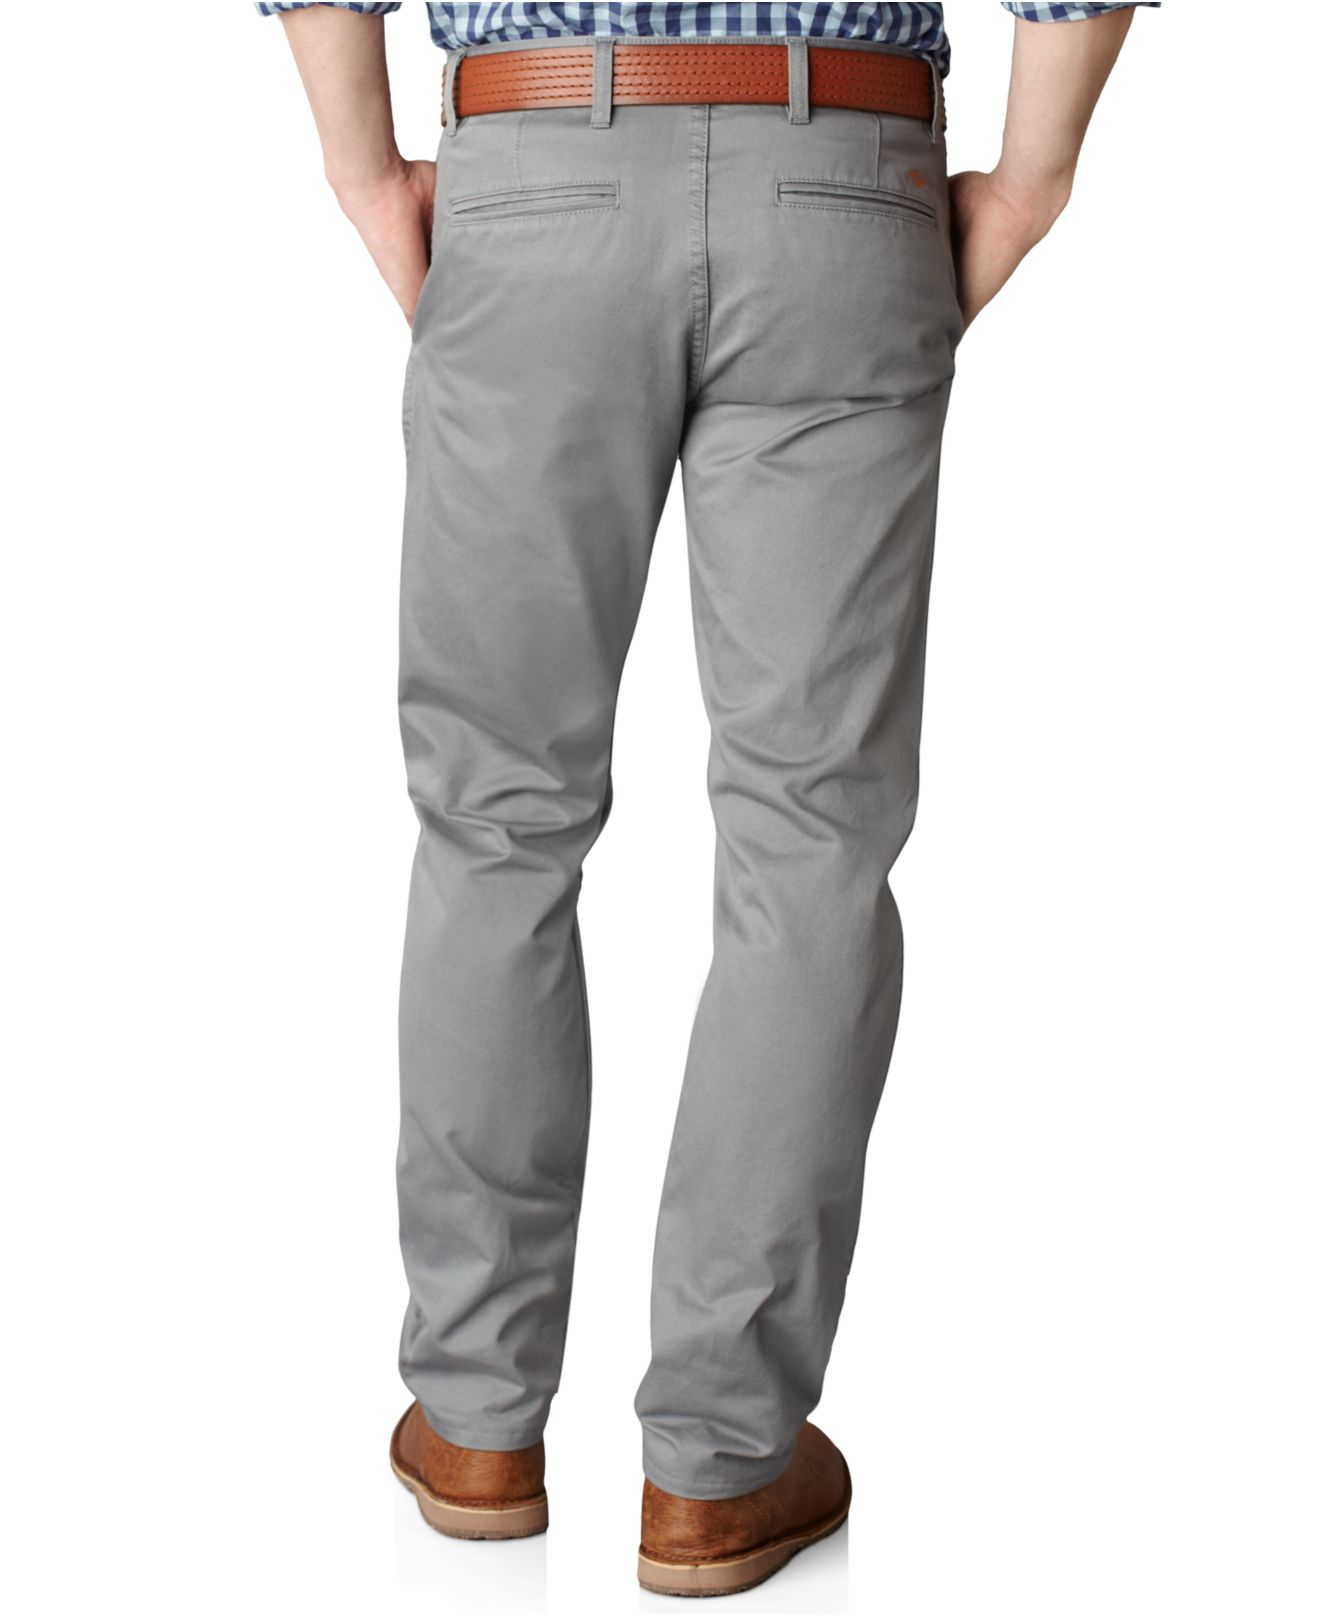 Lyst - Dockers D1 Slim Tapered Fit Alpha Khaki Flat Front Pants in Gray ...